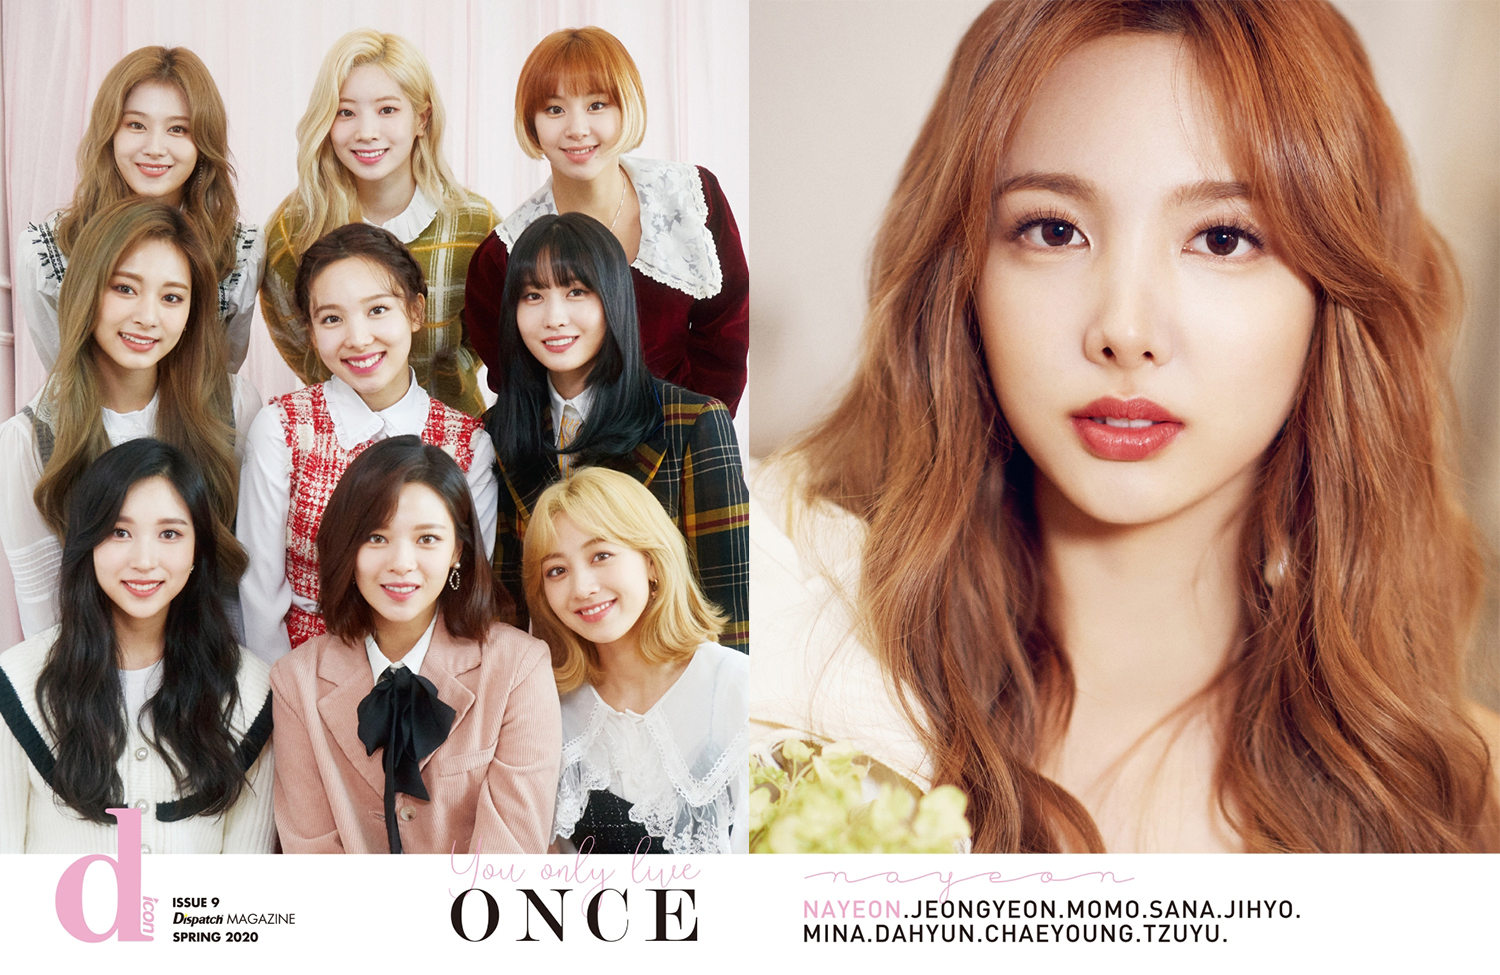 Twice only